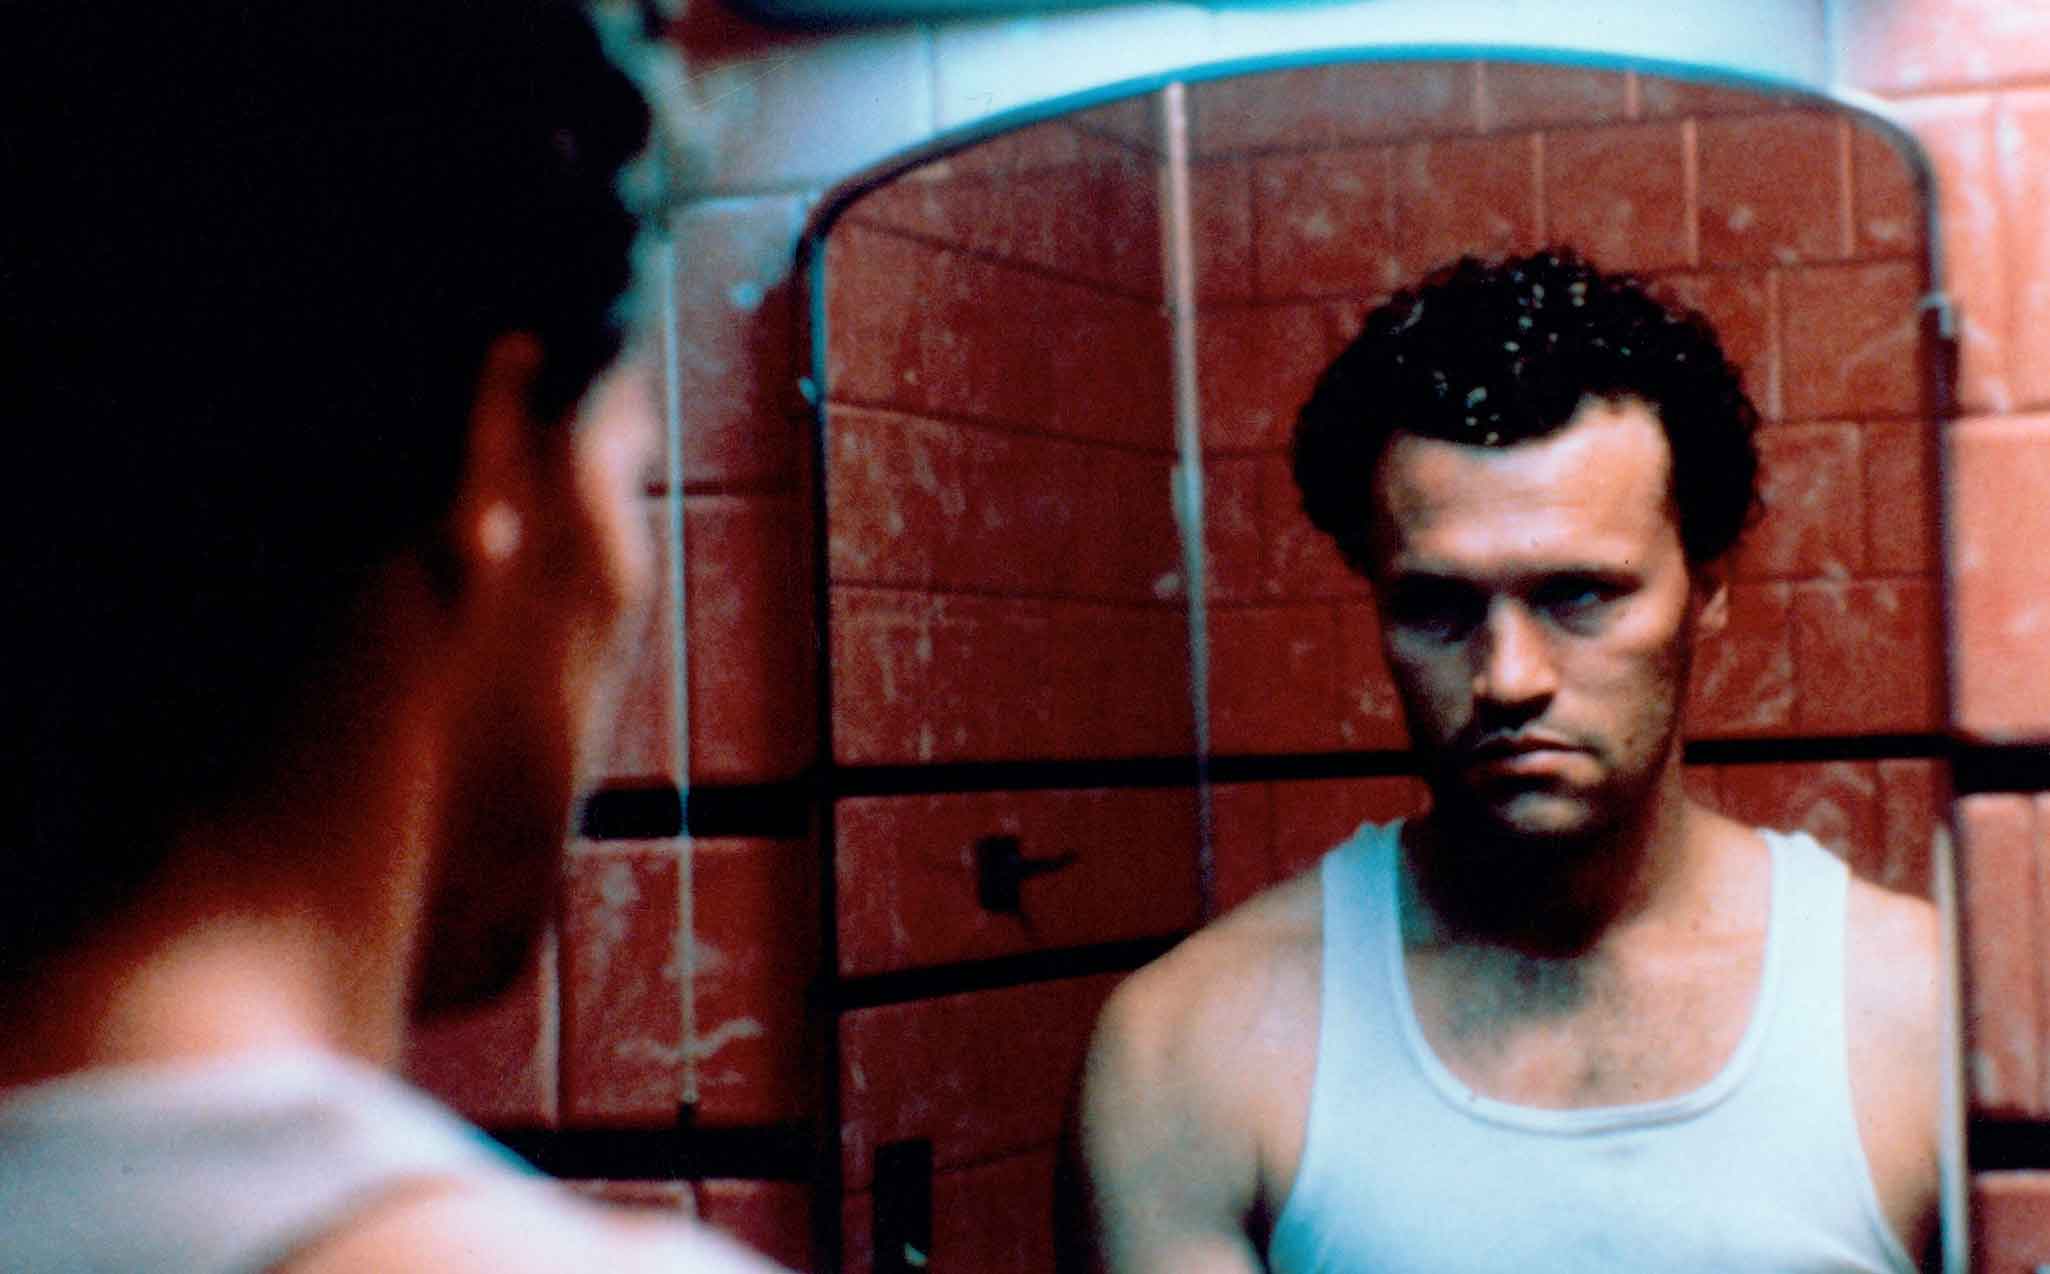 Henry: Portrait of a Serial Killer – The crimes and delusional fantasies of Henry Lee Lucas were the primary source of inspiration for this lastingly infamous horror movie.